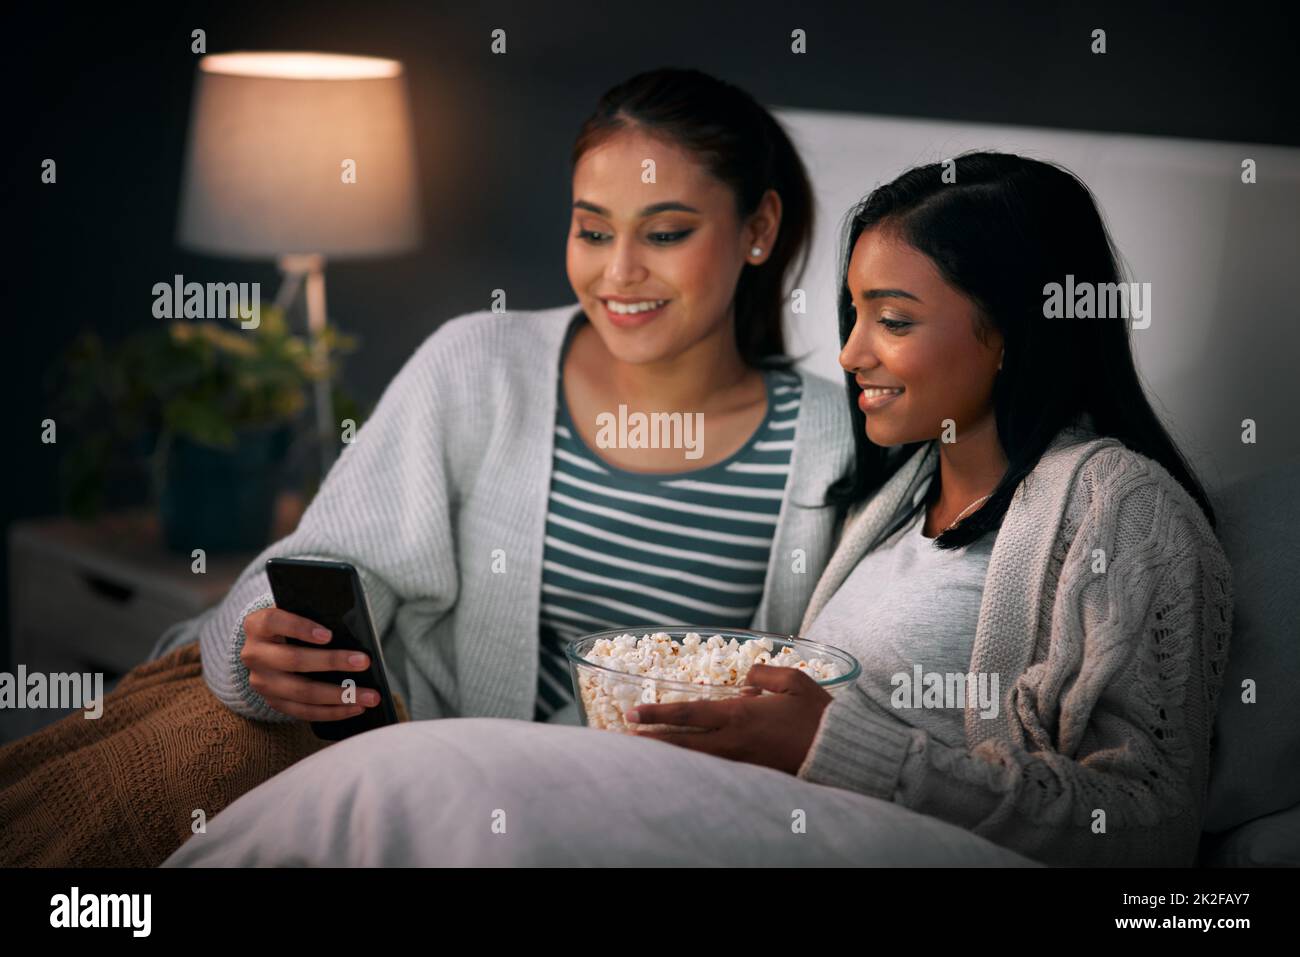 Should I invite her over. Shot of a young woman showing her friend something on her cellphone while sitting together on a bed. Stock Photo